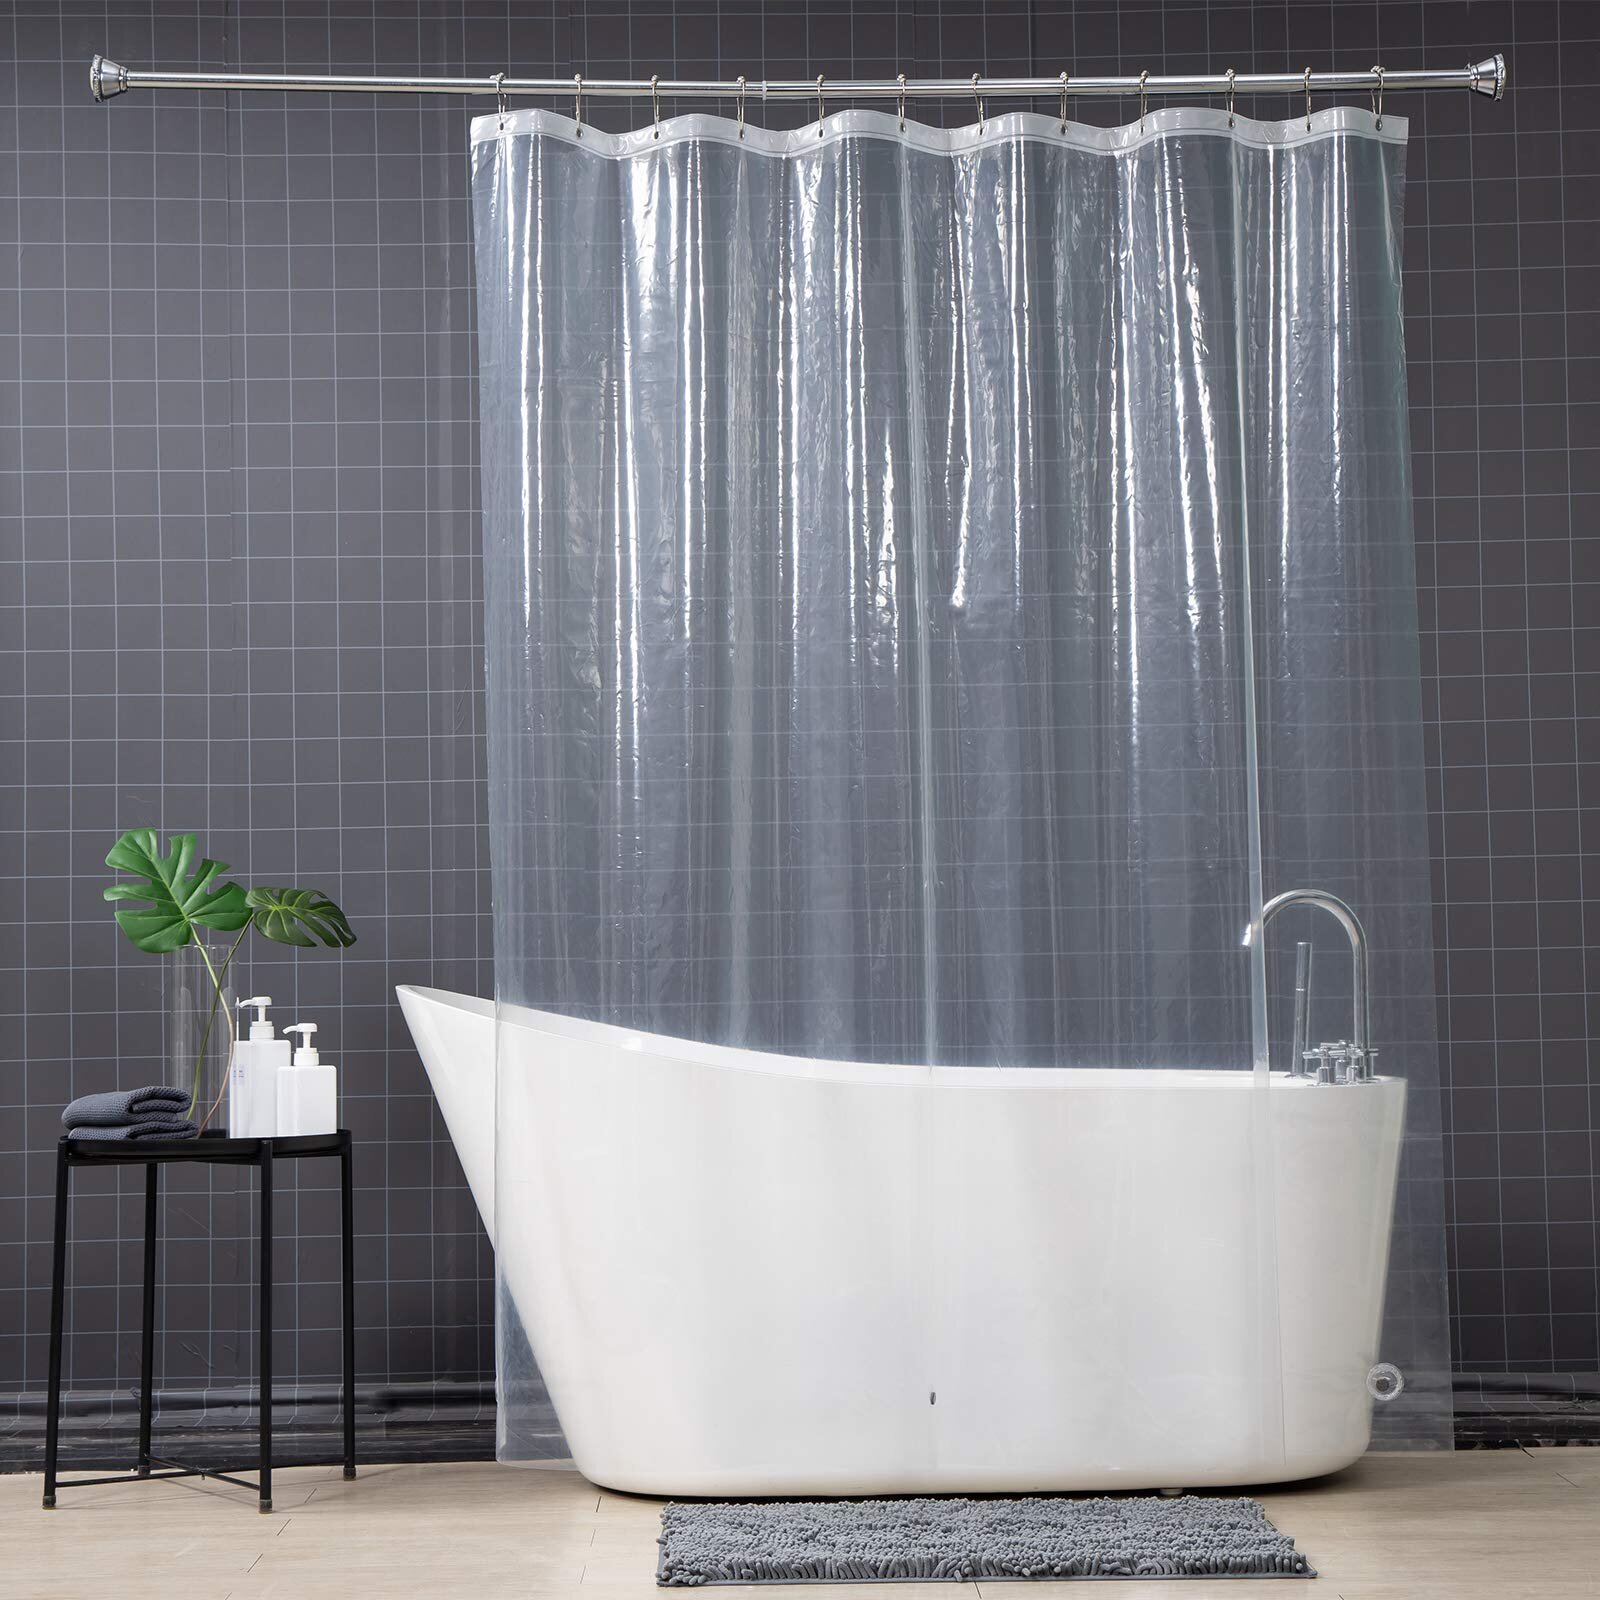 Plain Pure White Waterproof Fabric Shower Curtain Extra Long Hanging Curtains 